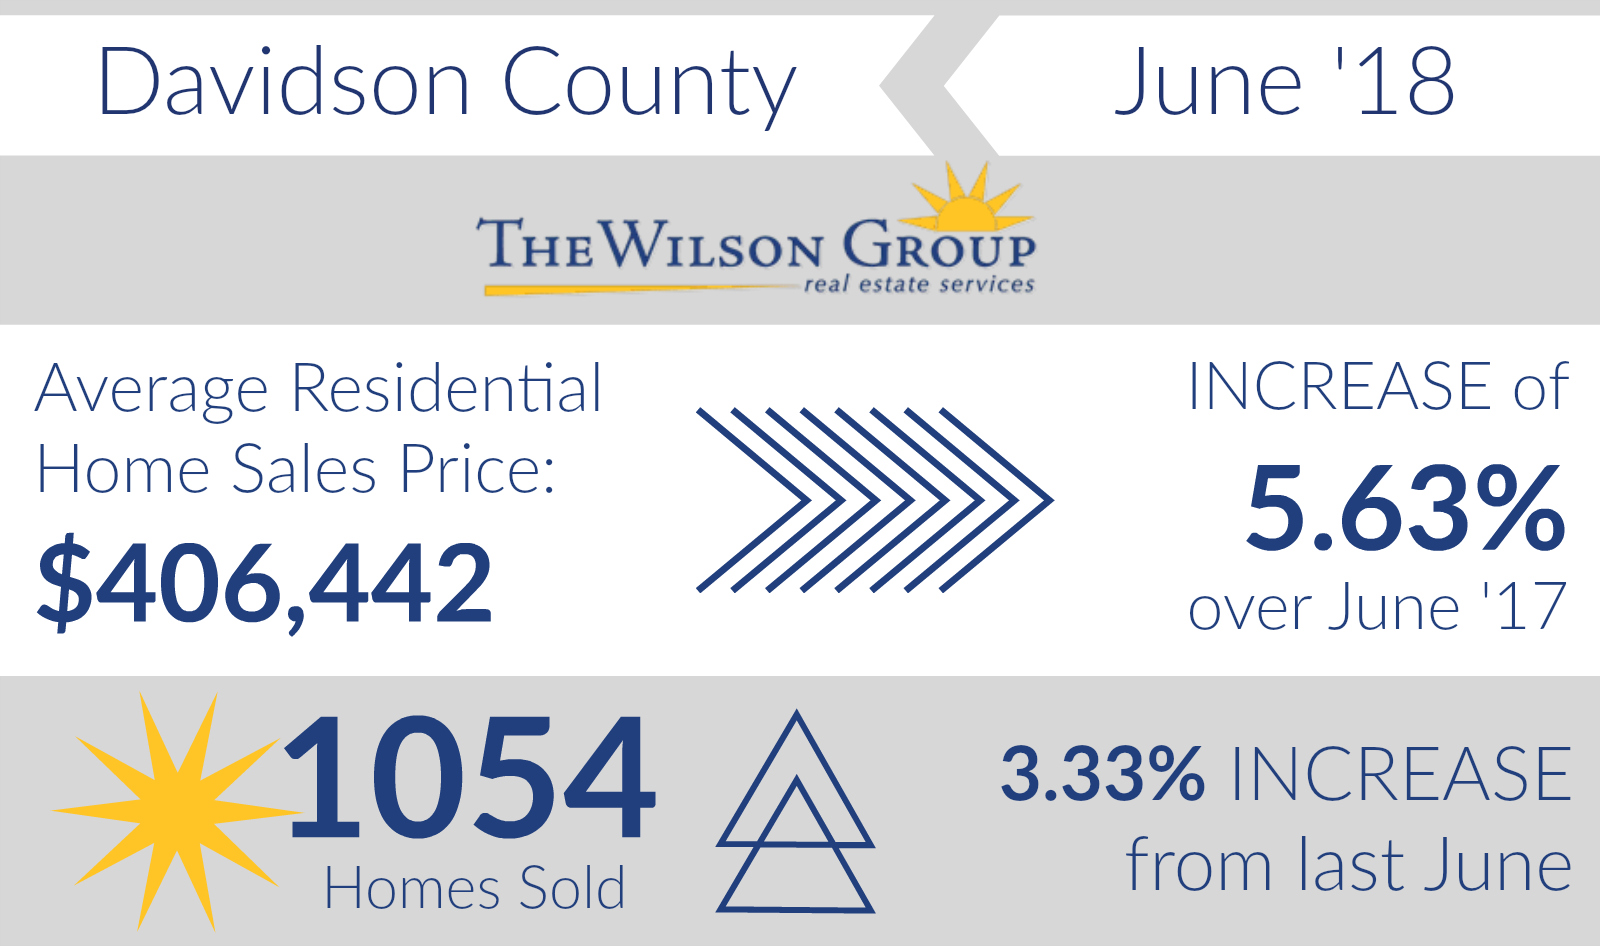 Real Estate is still going strong in the Greater Nashville Area!